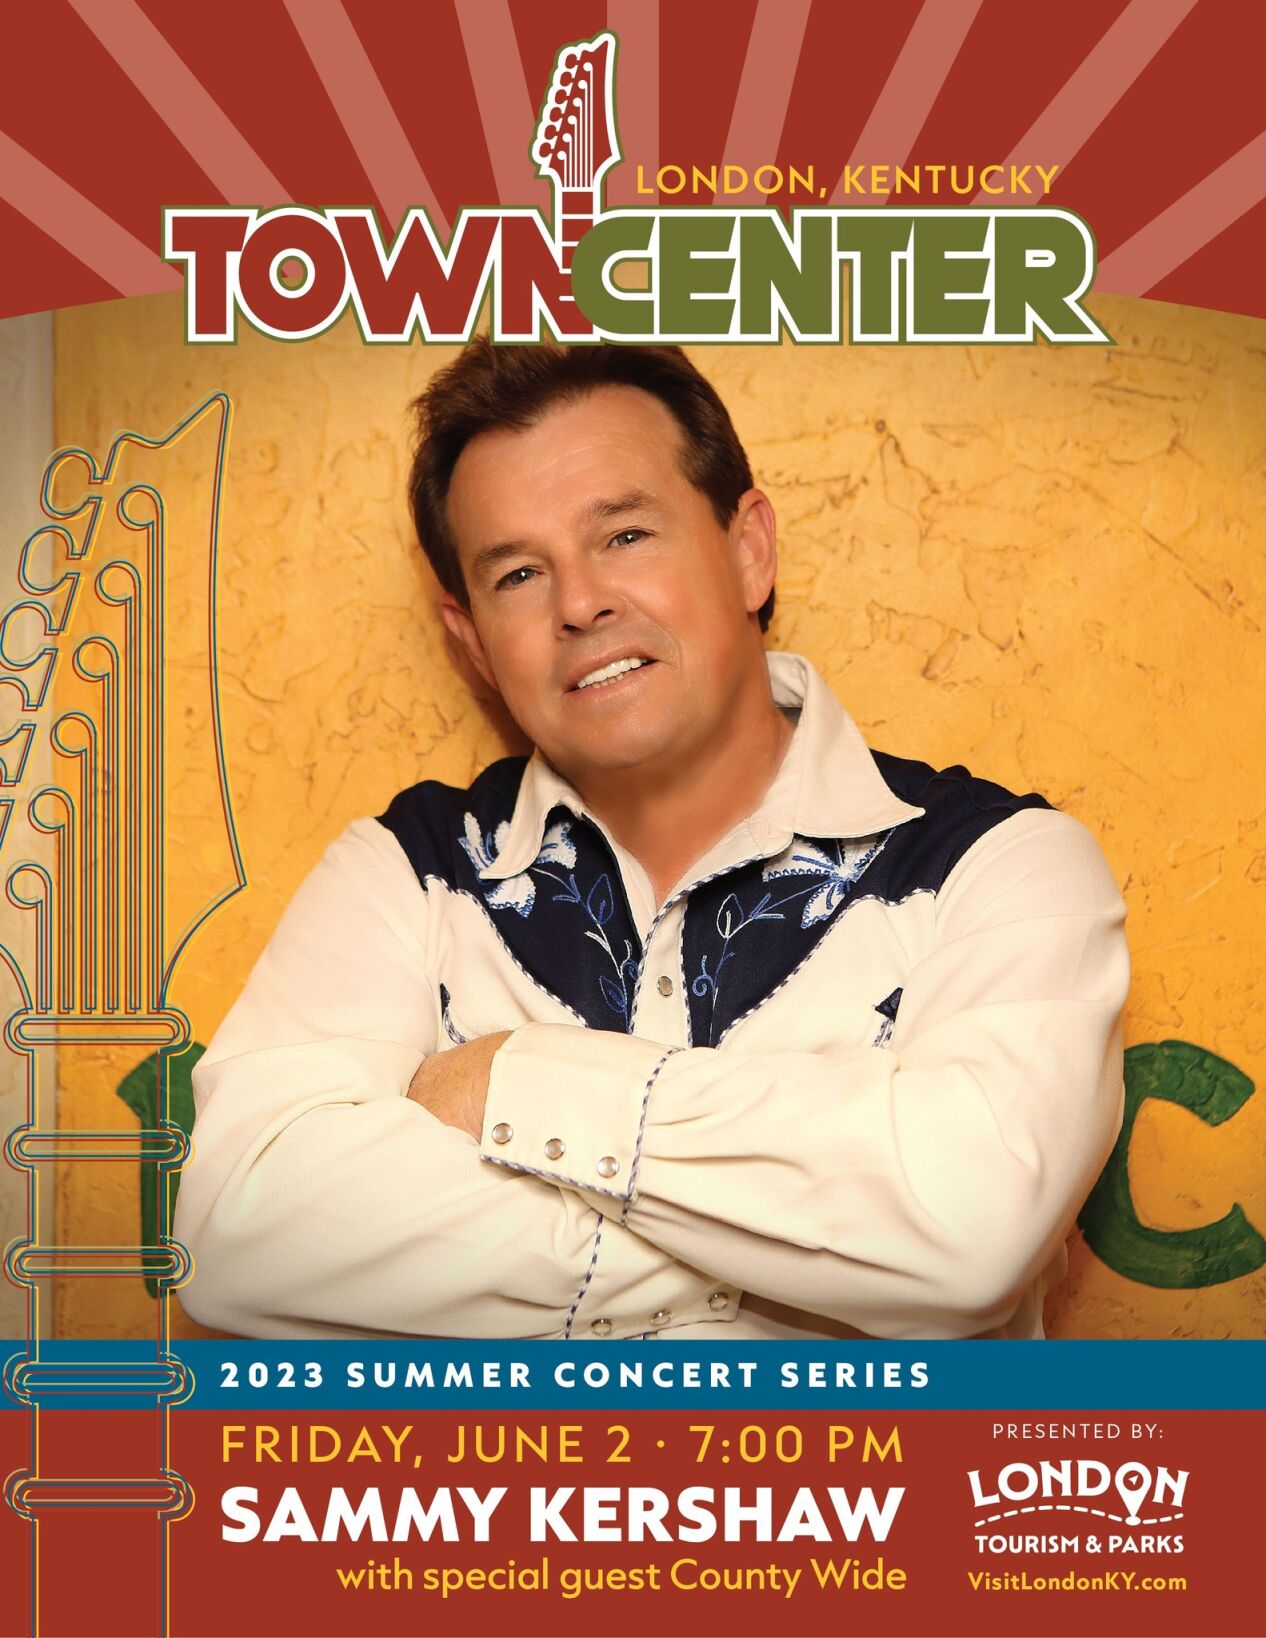 Sammy Kershaw to open 2023 Town Center Concert Series on Friday, June 2 Community sentinel